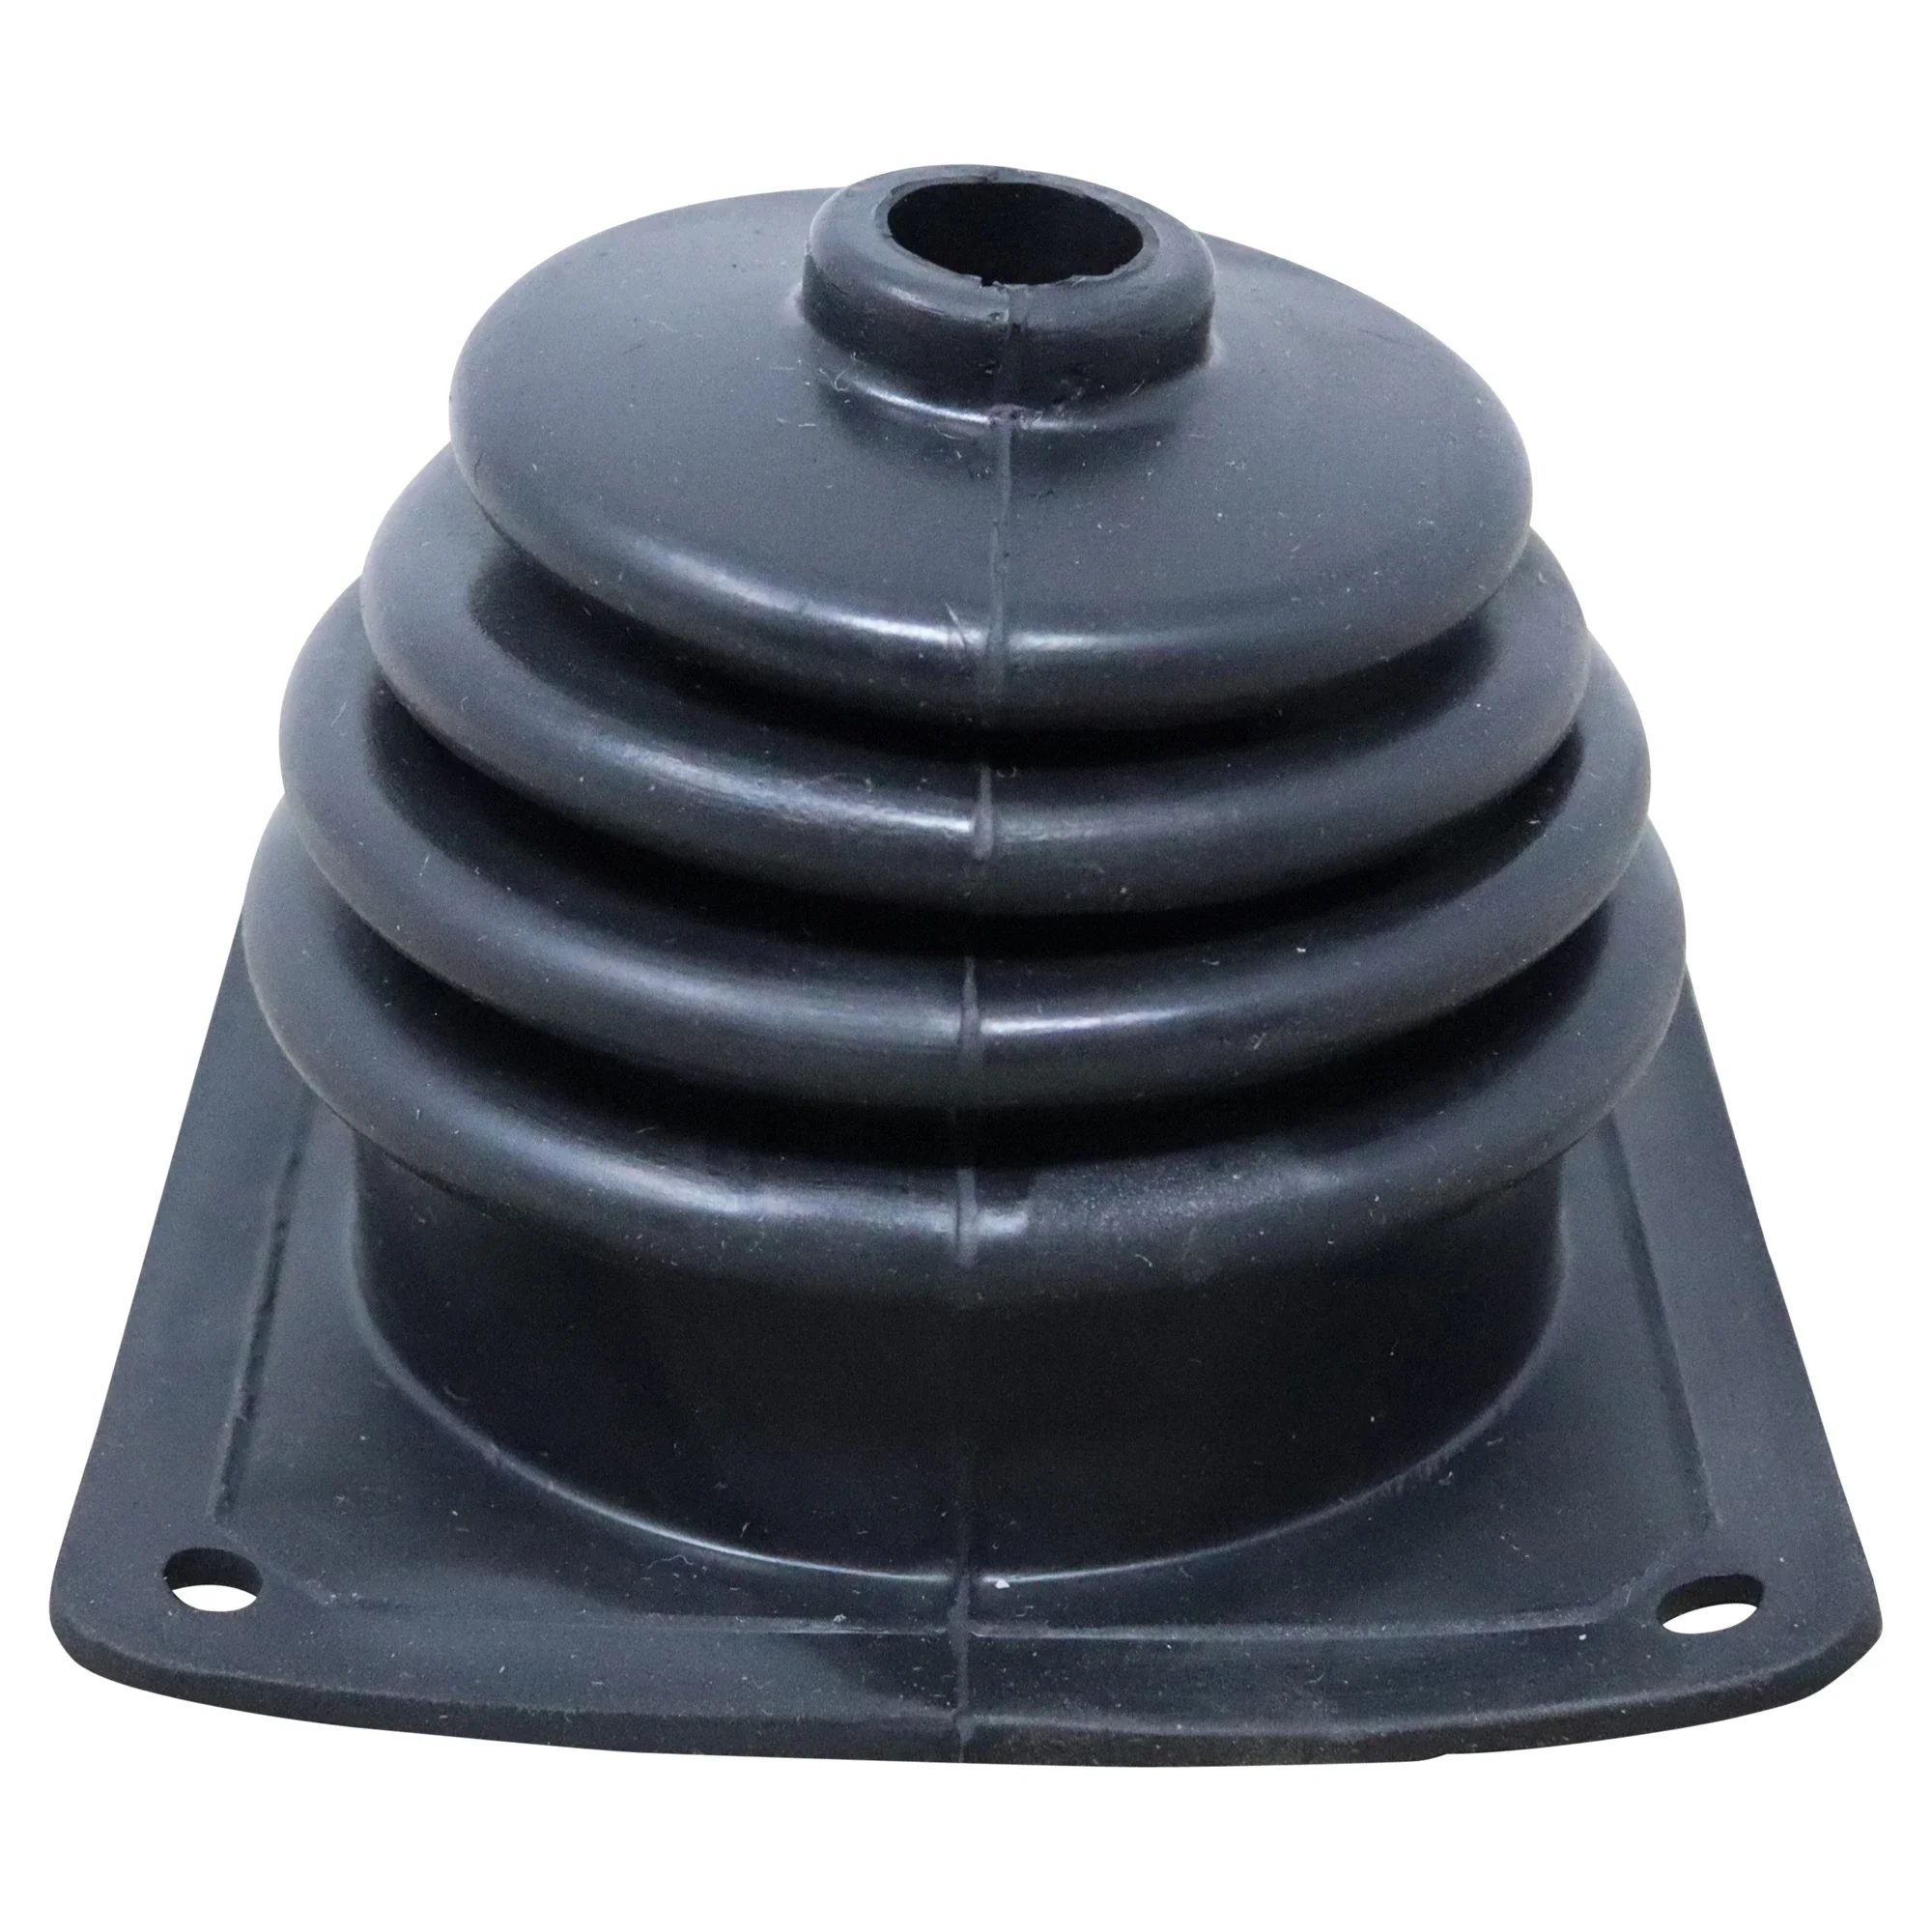 Wastebuilt® Replacement for Curotto-Can 3" x 3" Joystick Boot